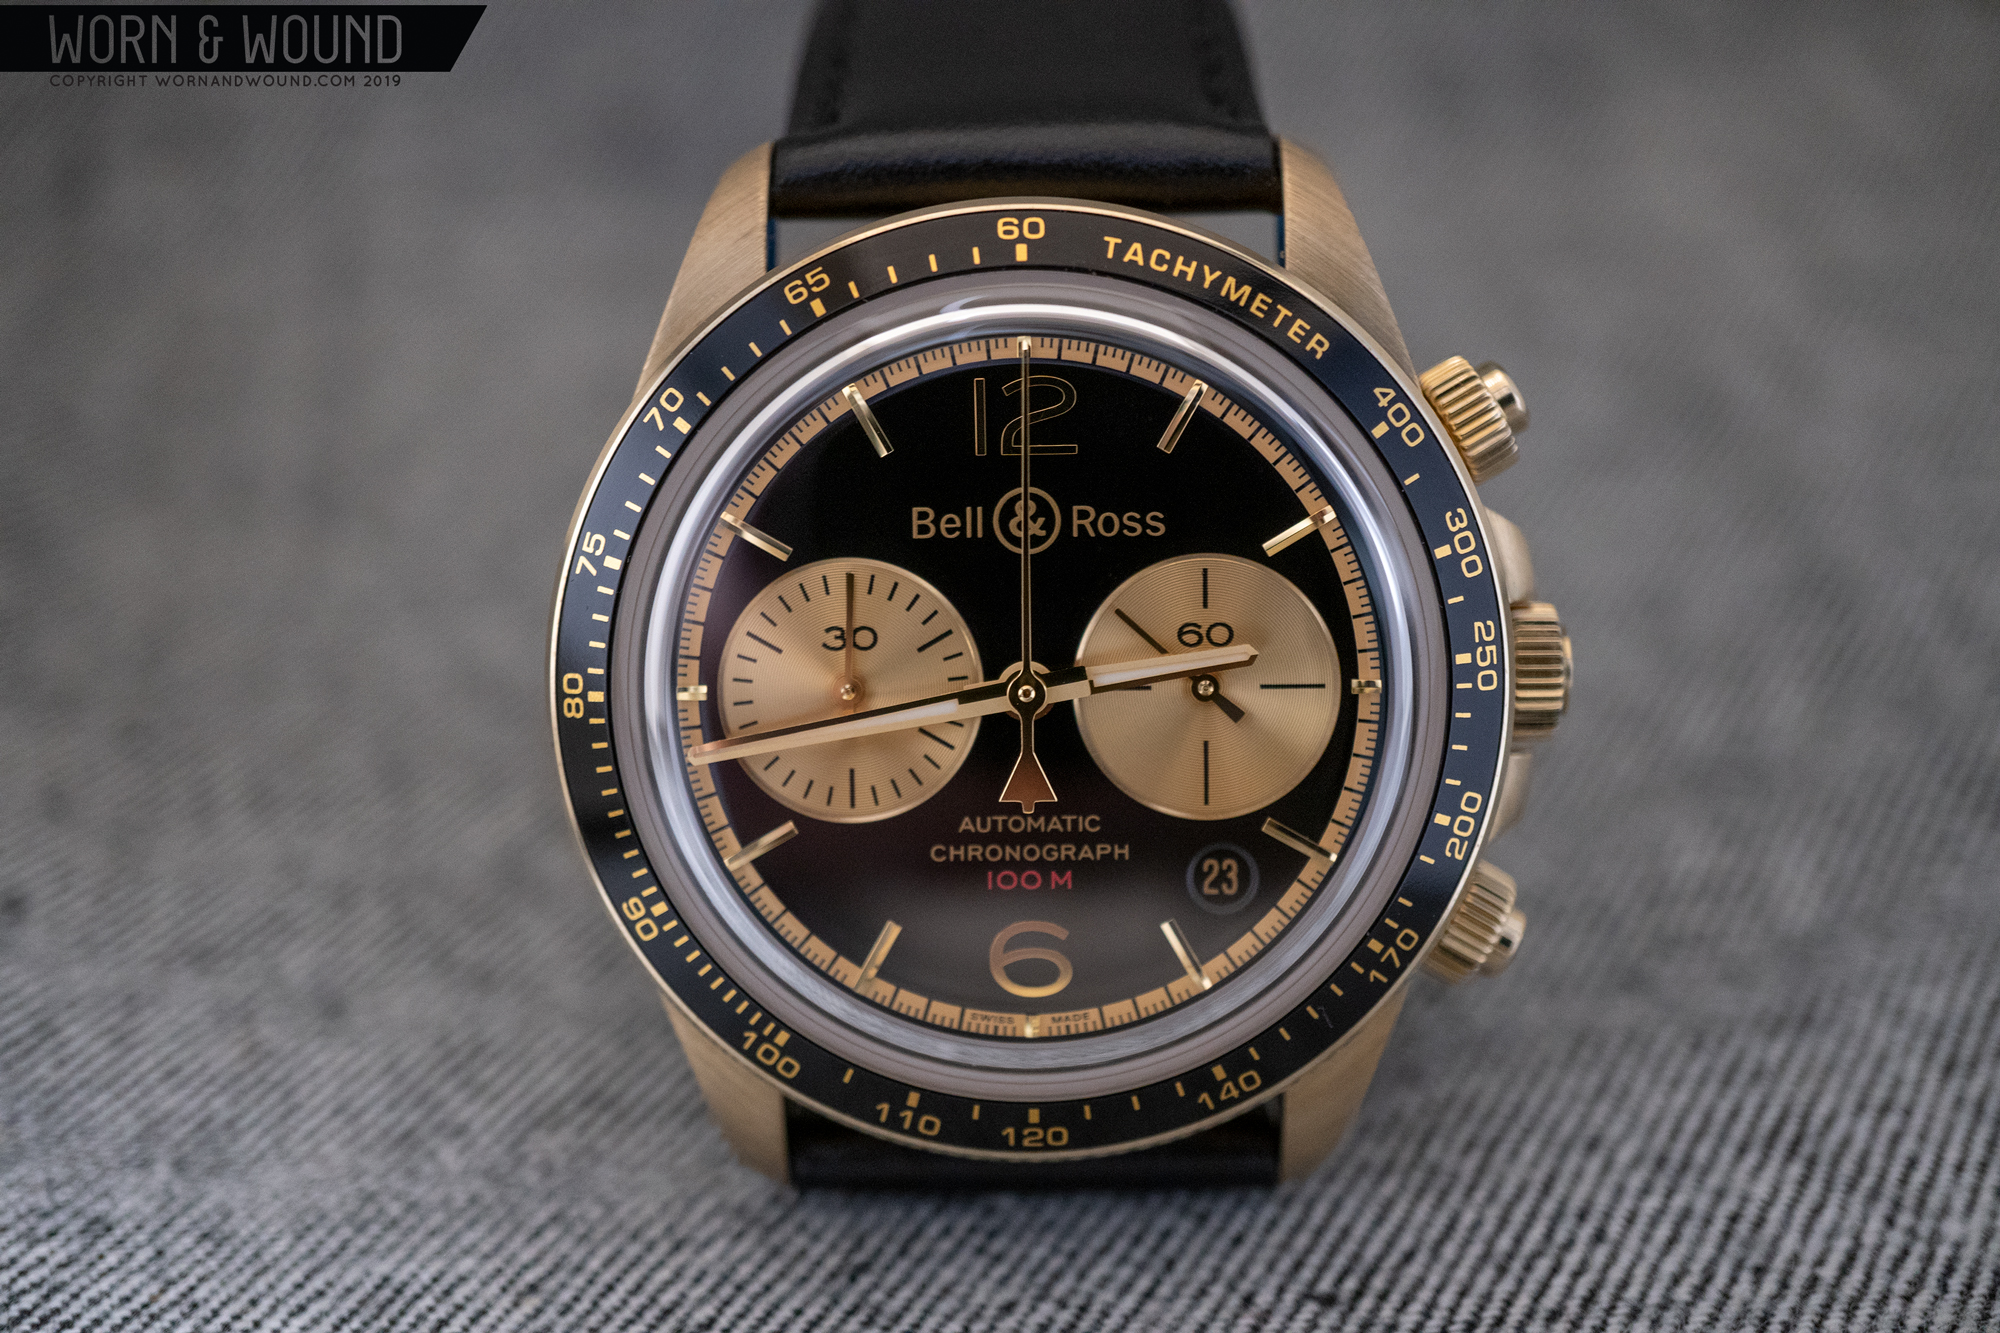 The Worn & Wound Podcast Ep. 91: Baselworld 2019 – Day 3 with Nomos, Rolex, Bell & Ross, and More